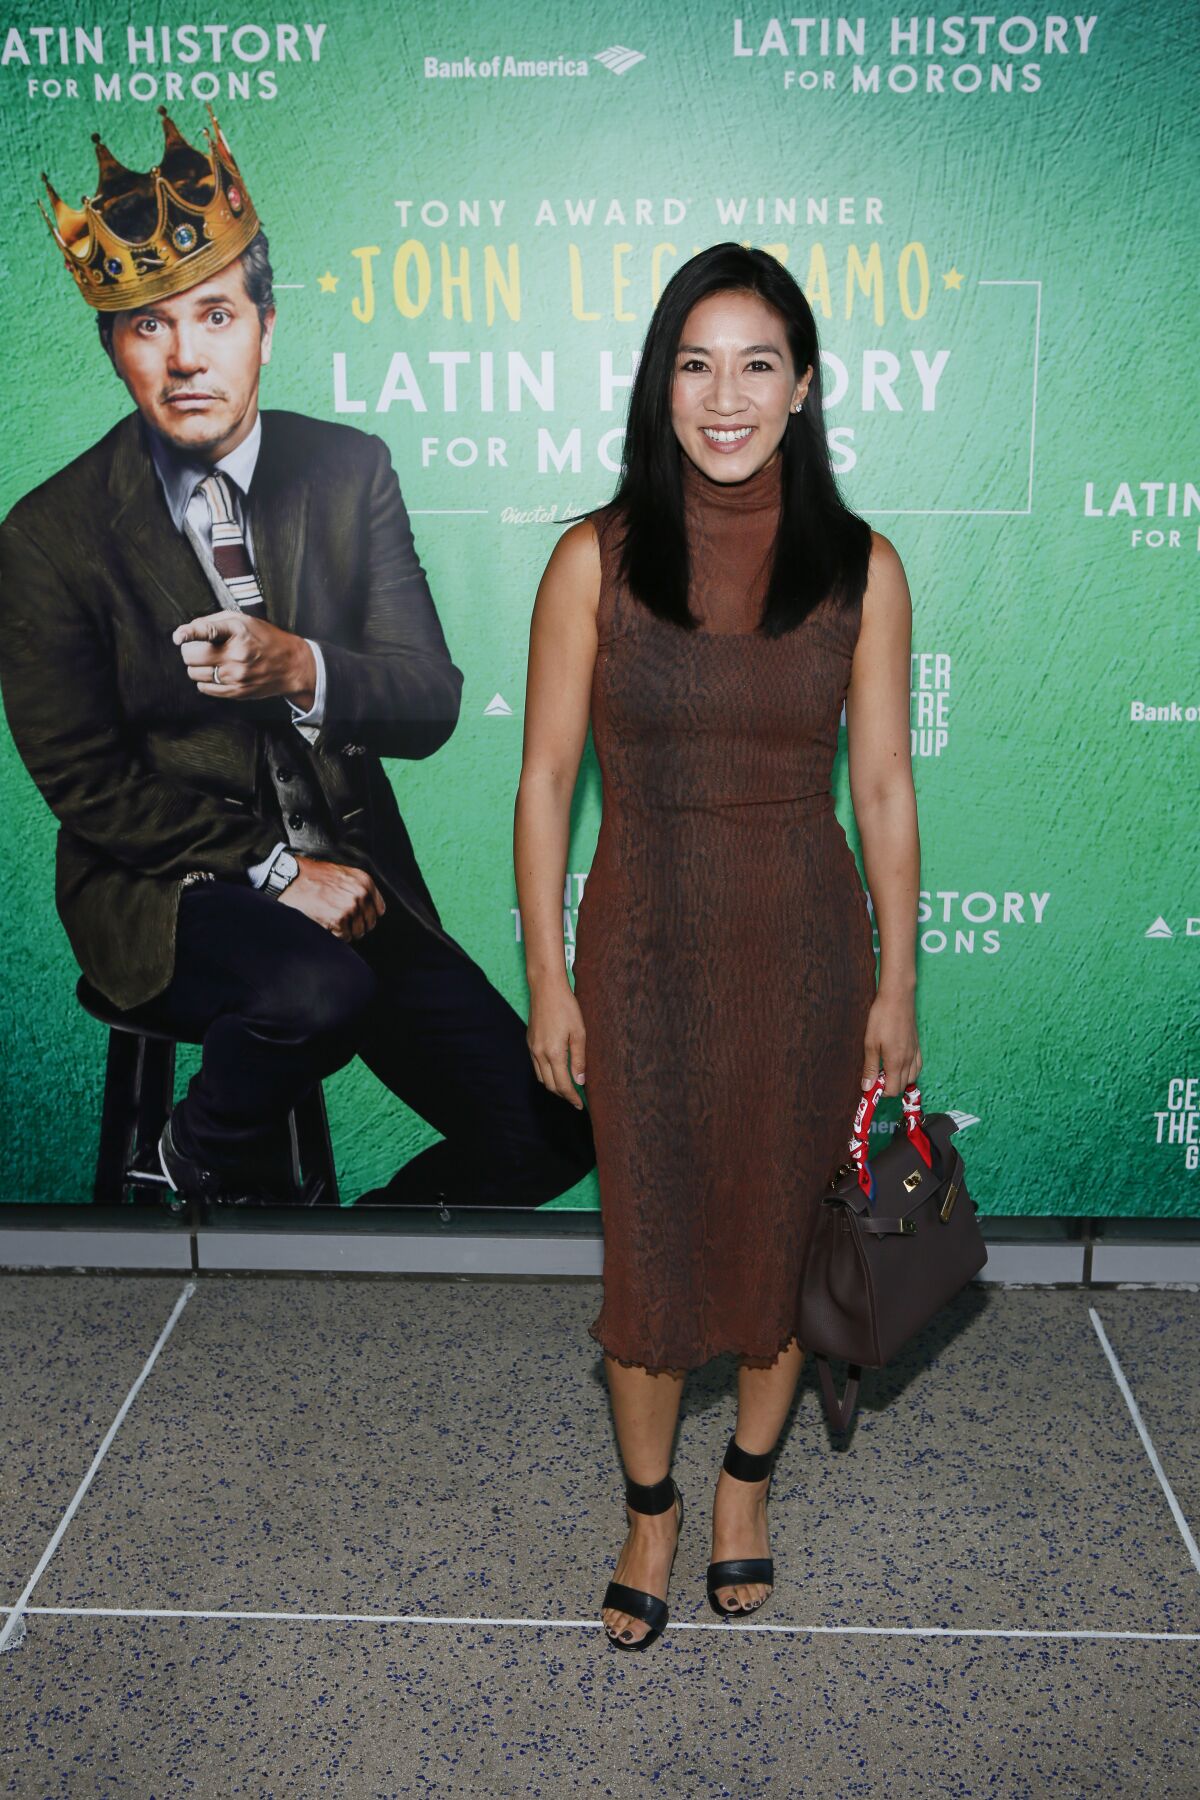 Michelle Kwan at opening night of “Latin History for Morons” at Ahmanson Theatre in Los Angeles.